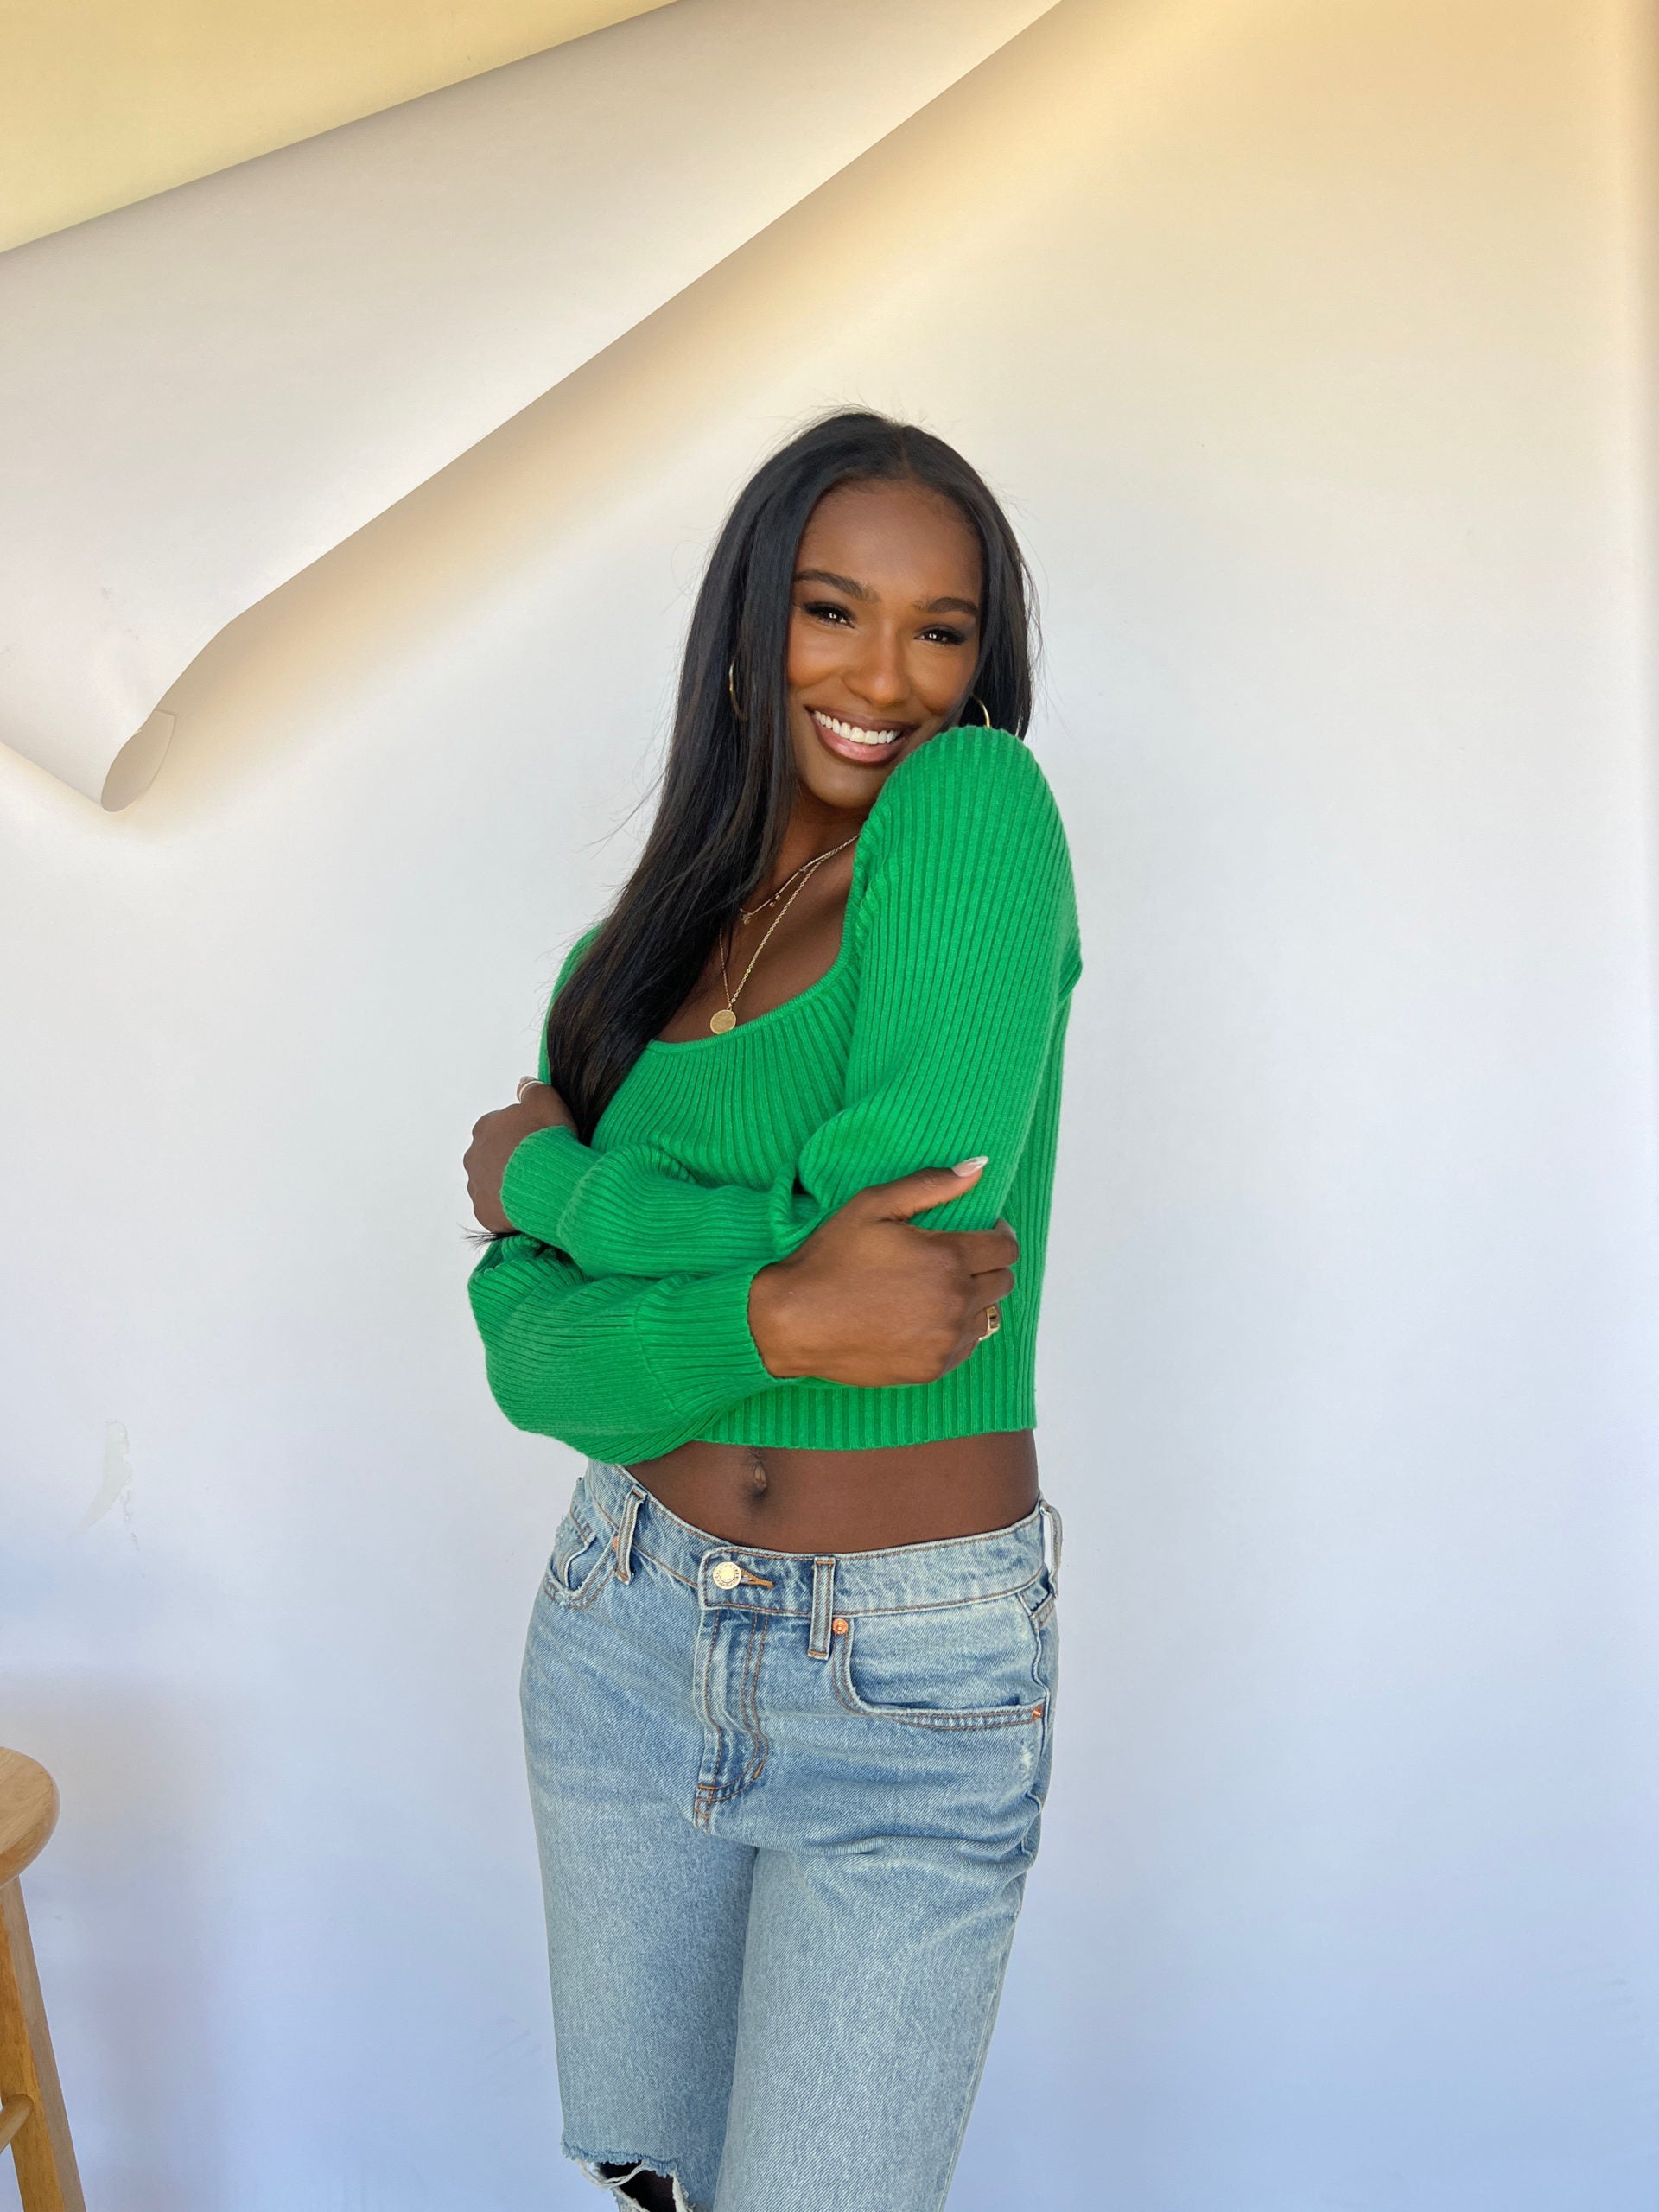 Lifestyle influencer and Lash Lounge guest, Nikki Baize, posing in front of a white backdrop while smiling and wearing a green sweater and jeans.